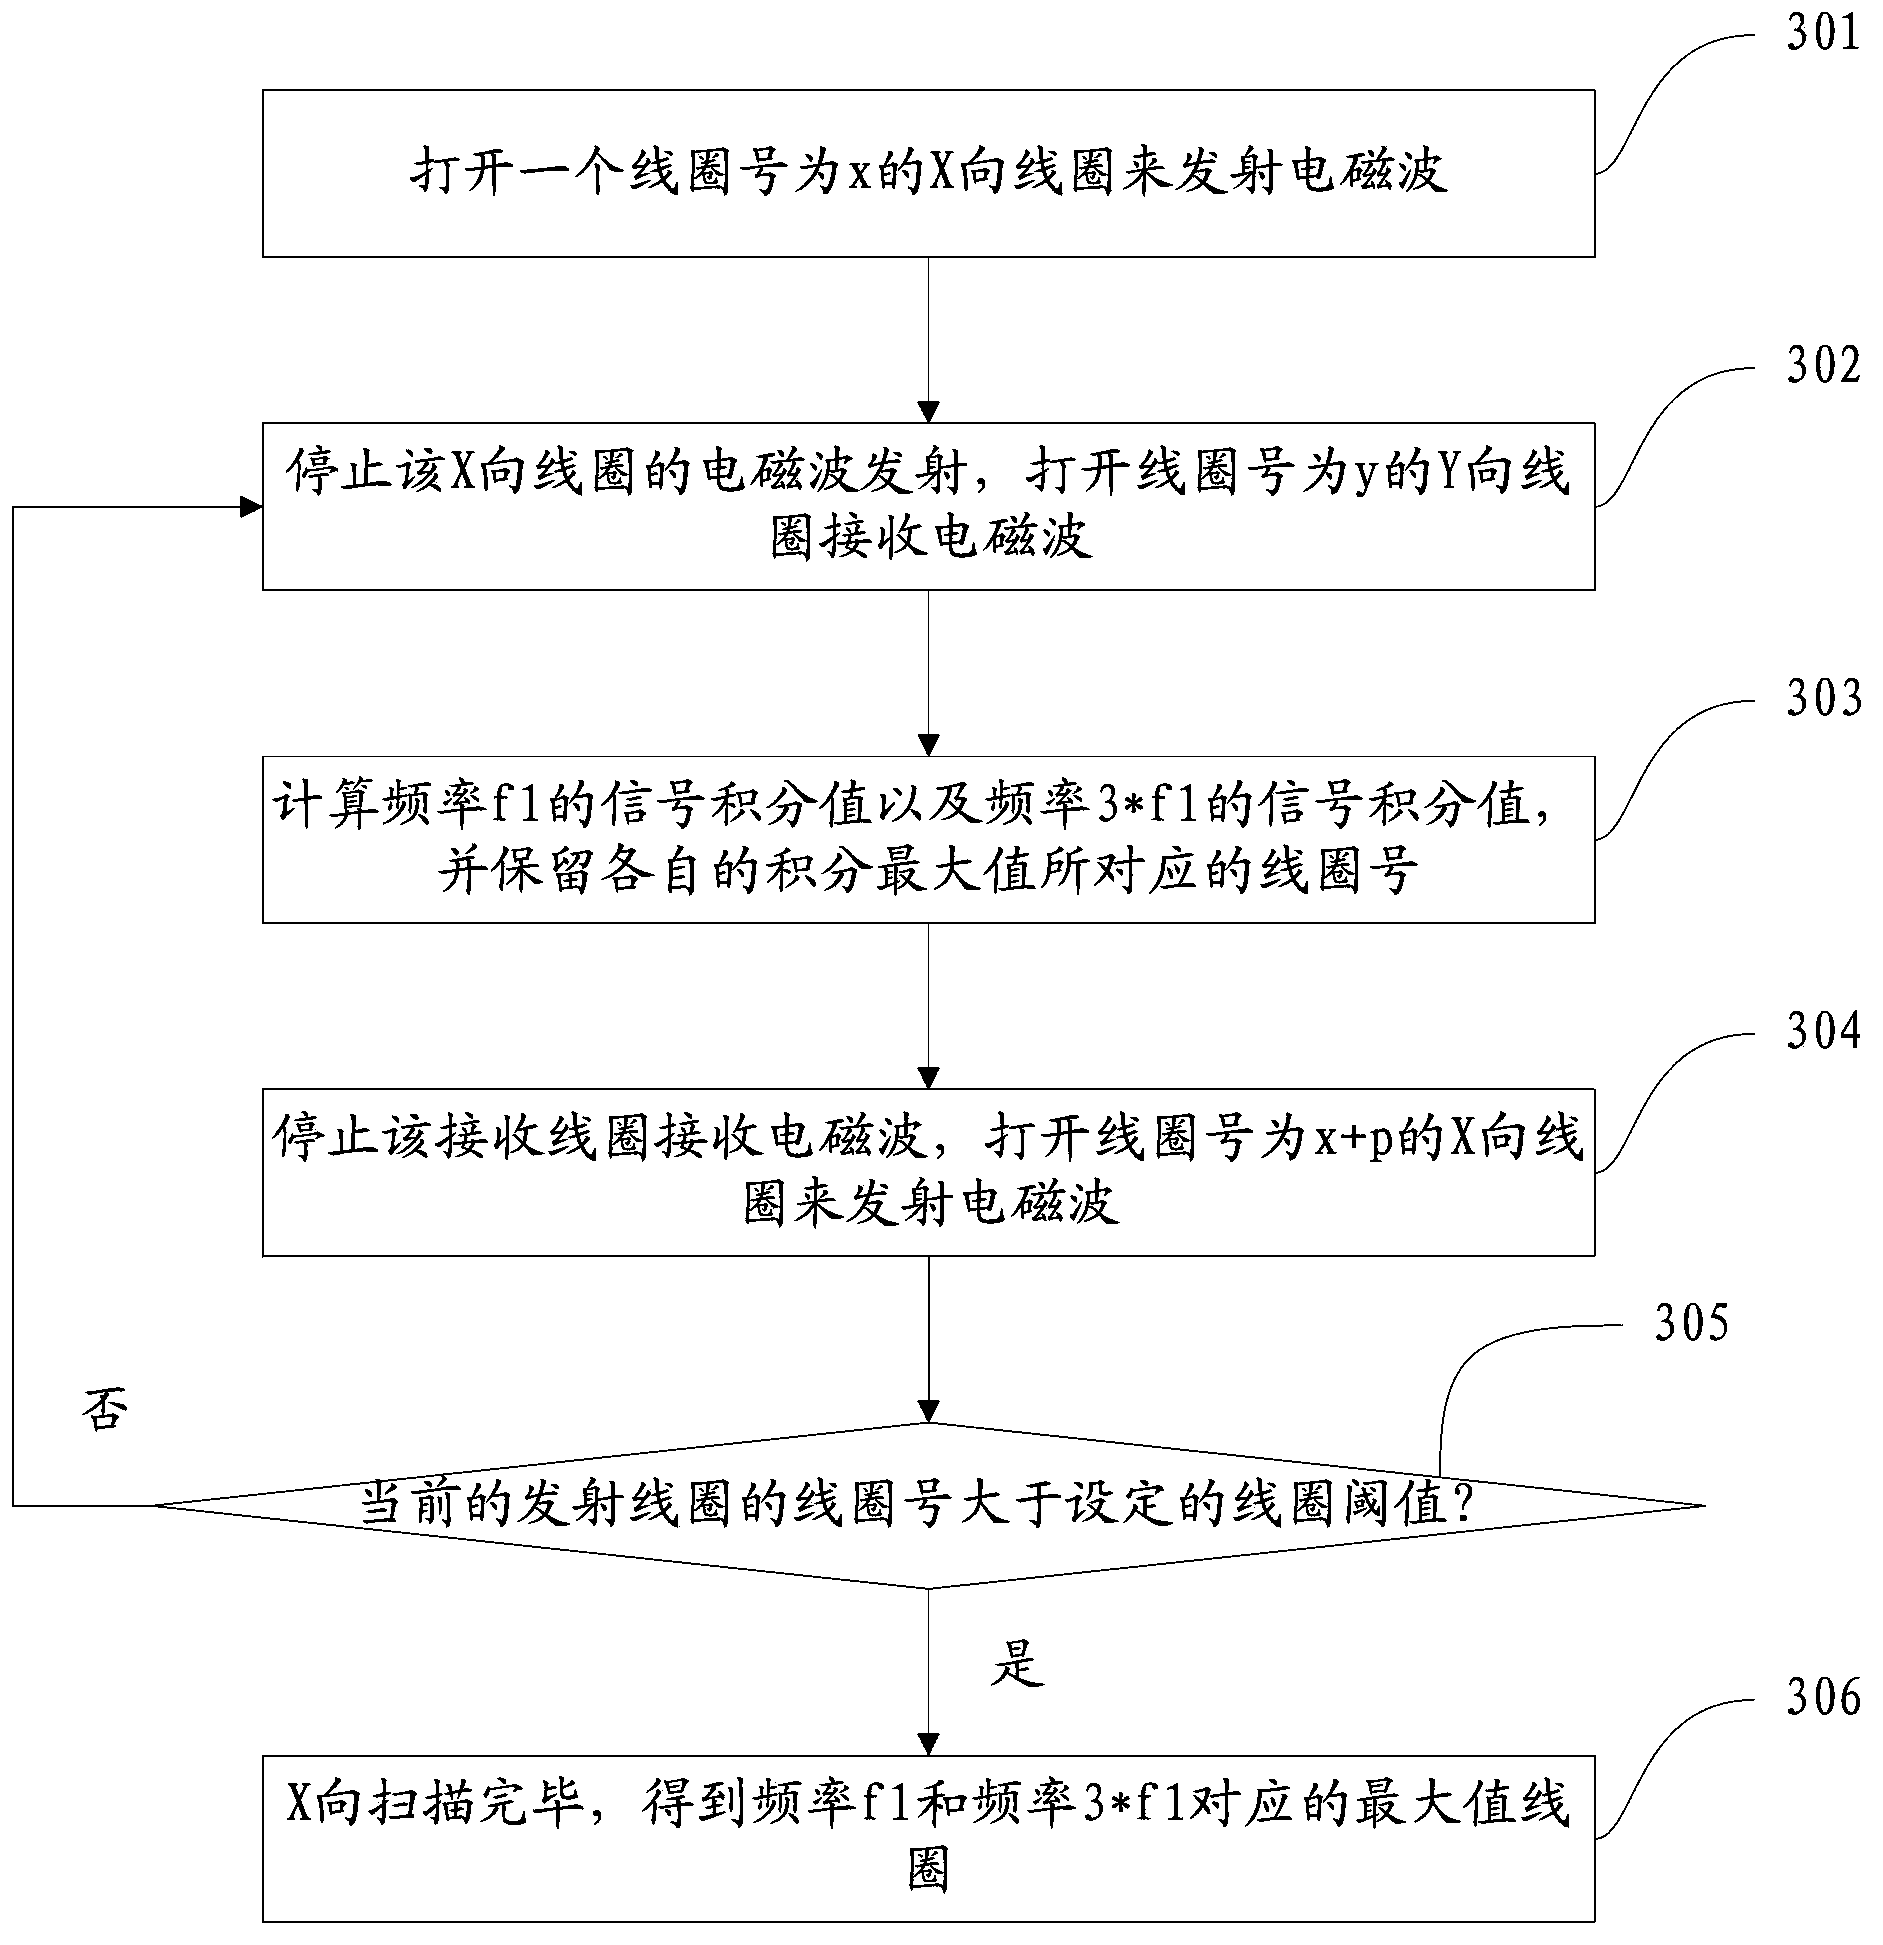 Electromagnetic signal control method, electromagnetic induction detecting device and electromagnetic handwriting system